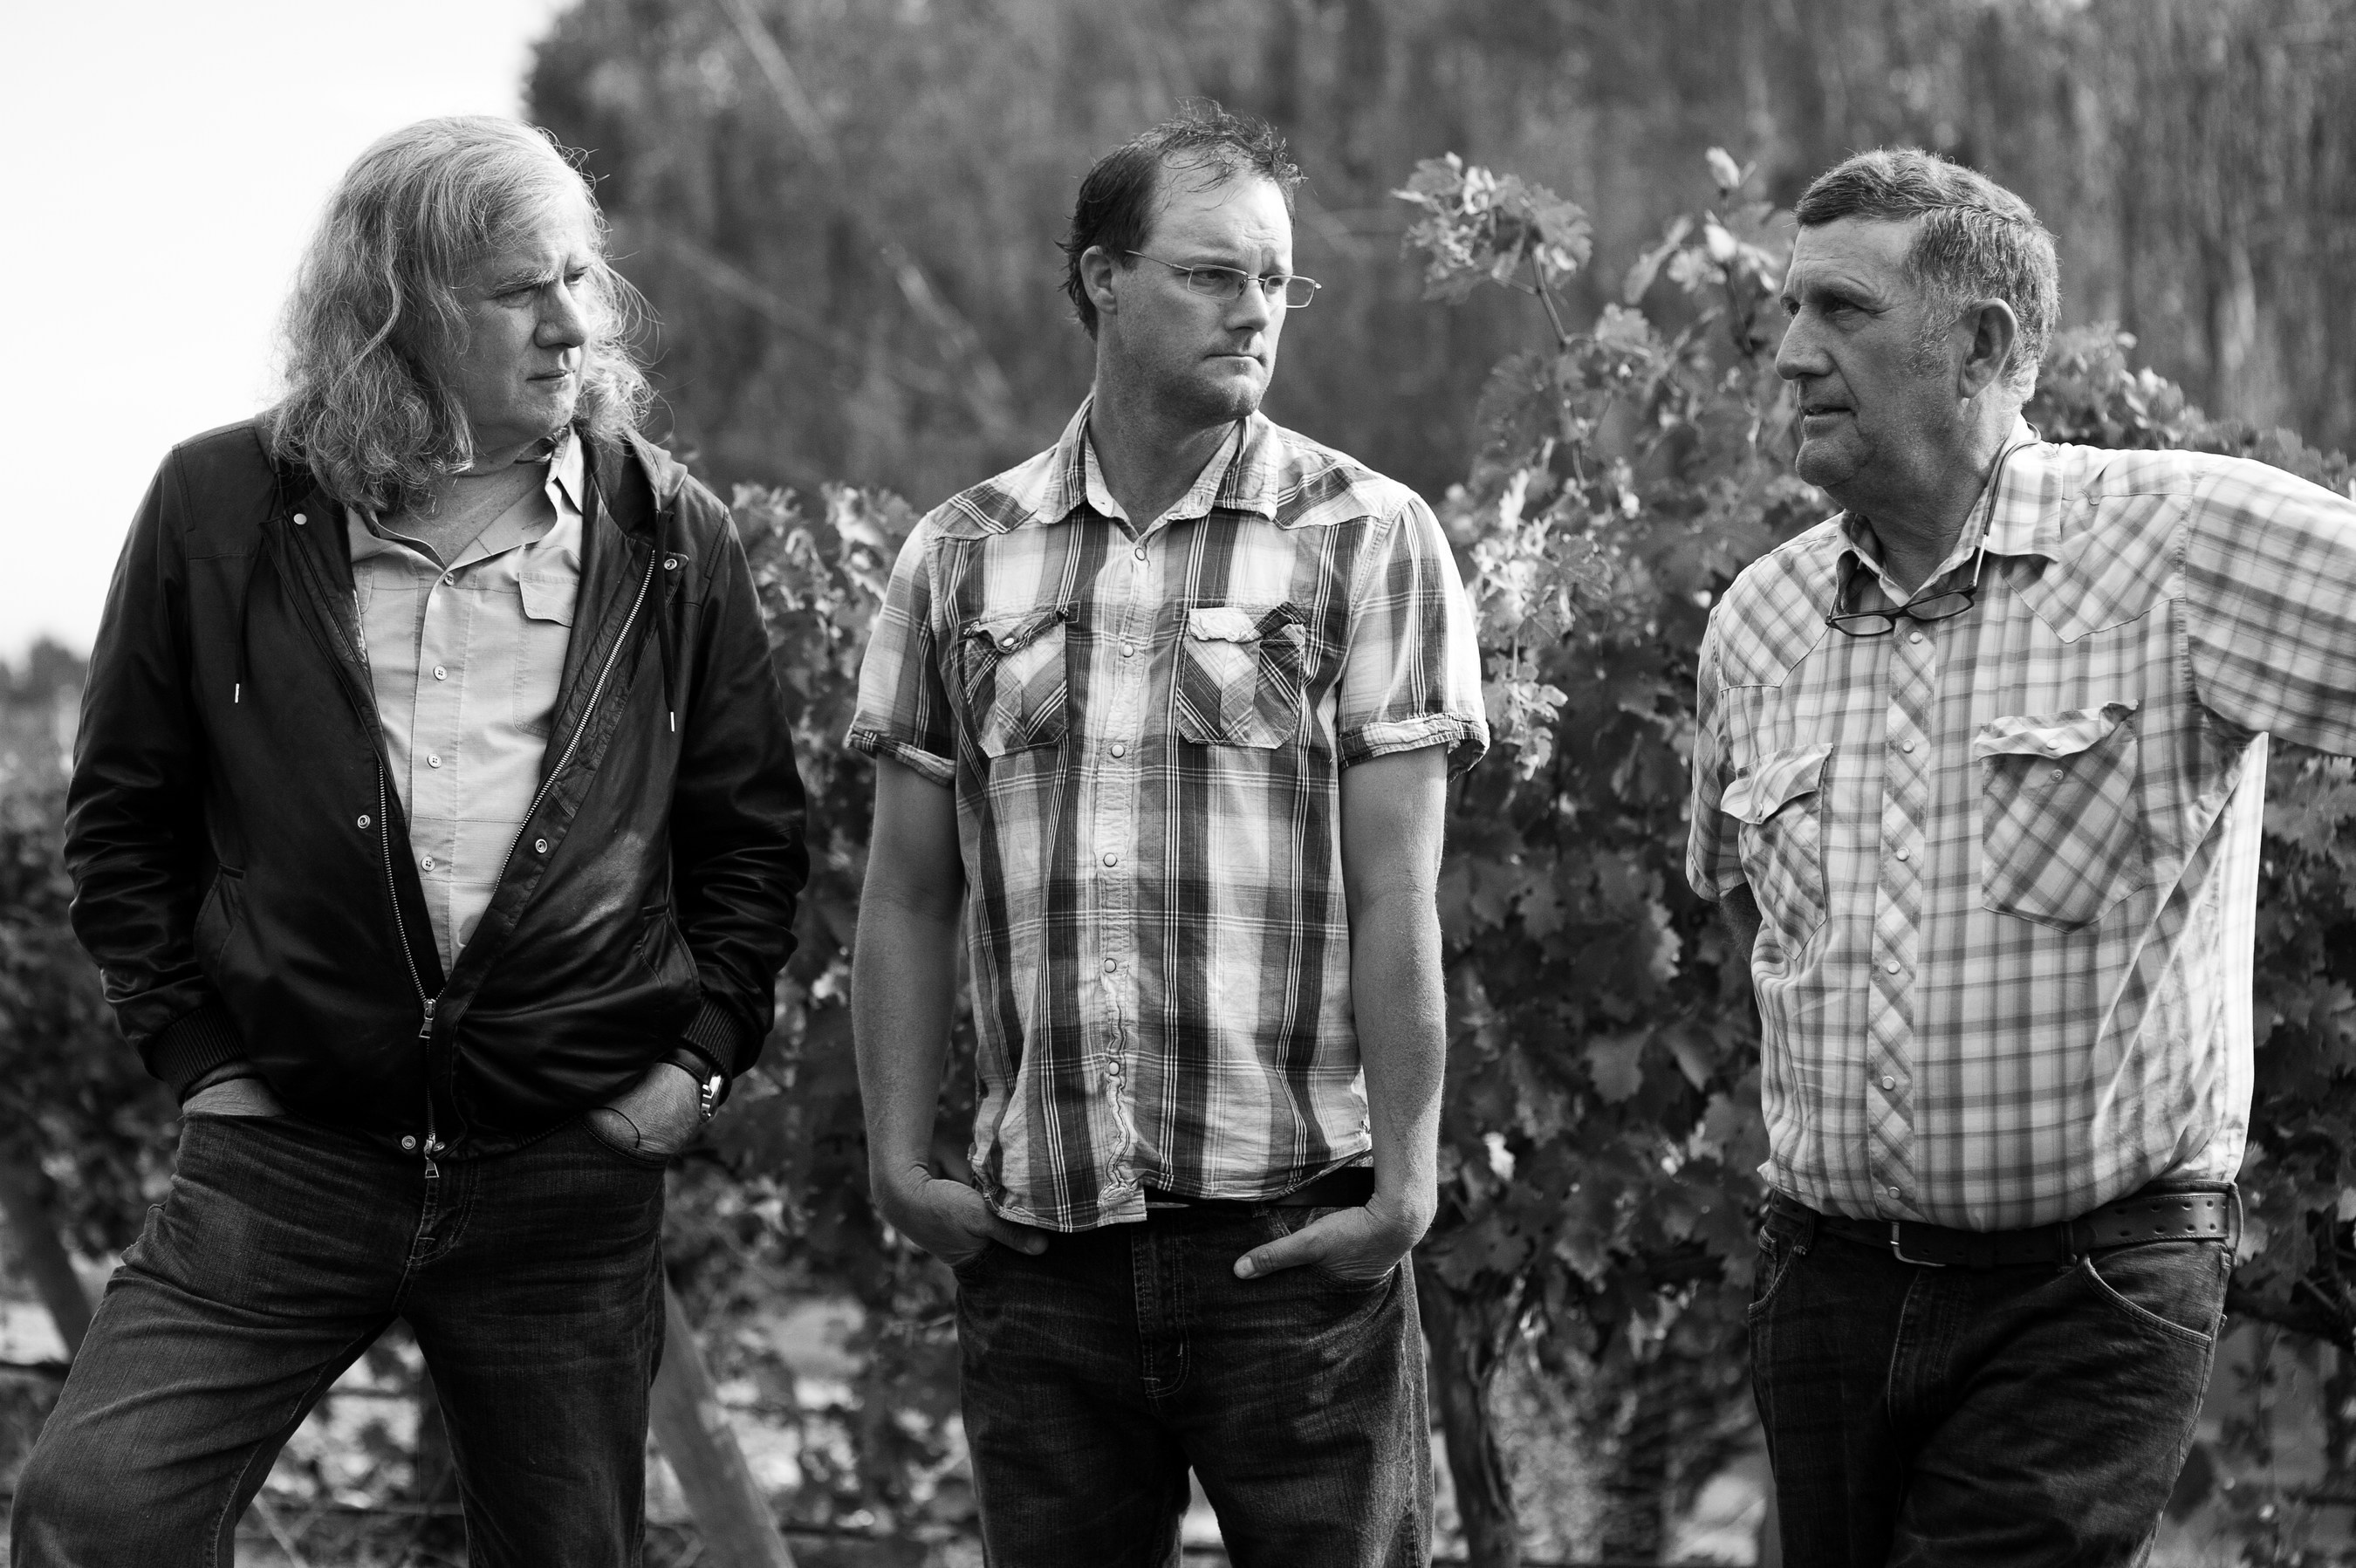 (L-R): Chris Upchurch, Executive Winemaker & Co-Founder of DeLille Cellars; Todd Newhouse, Harrison Hill Vineyard Manager; & Steve Newhouse, 3rd Generation Harrison Hill Vineyard Owner.